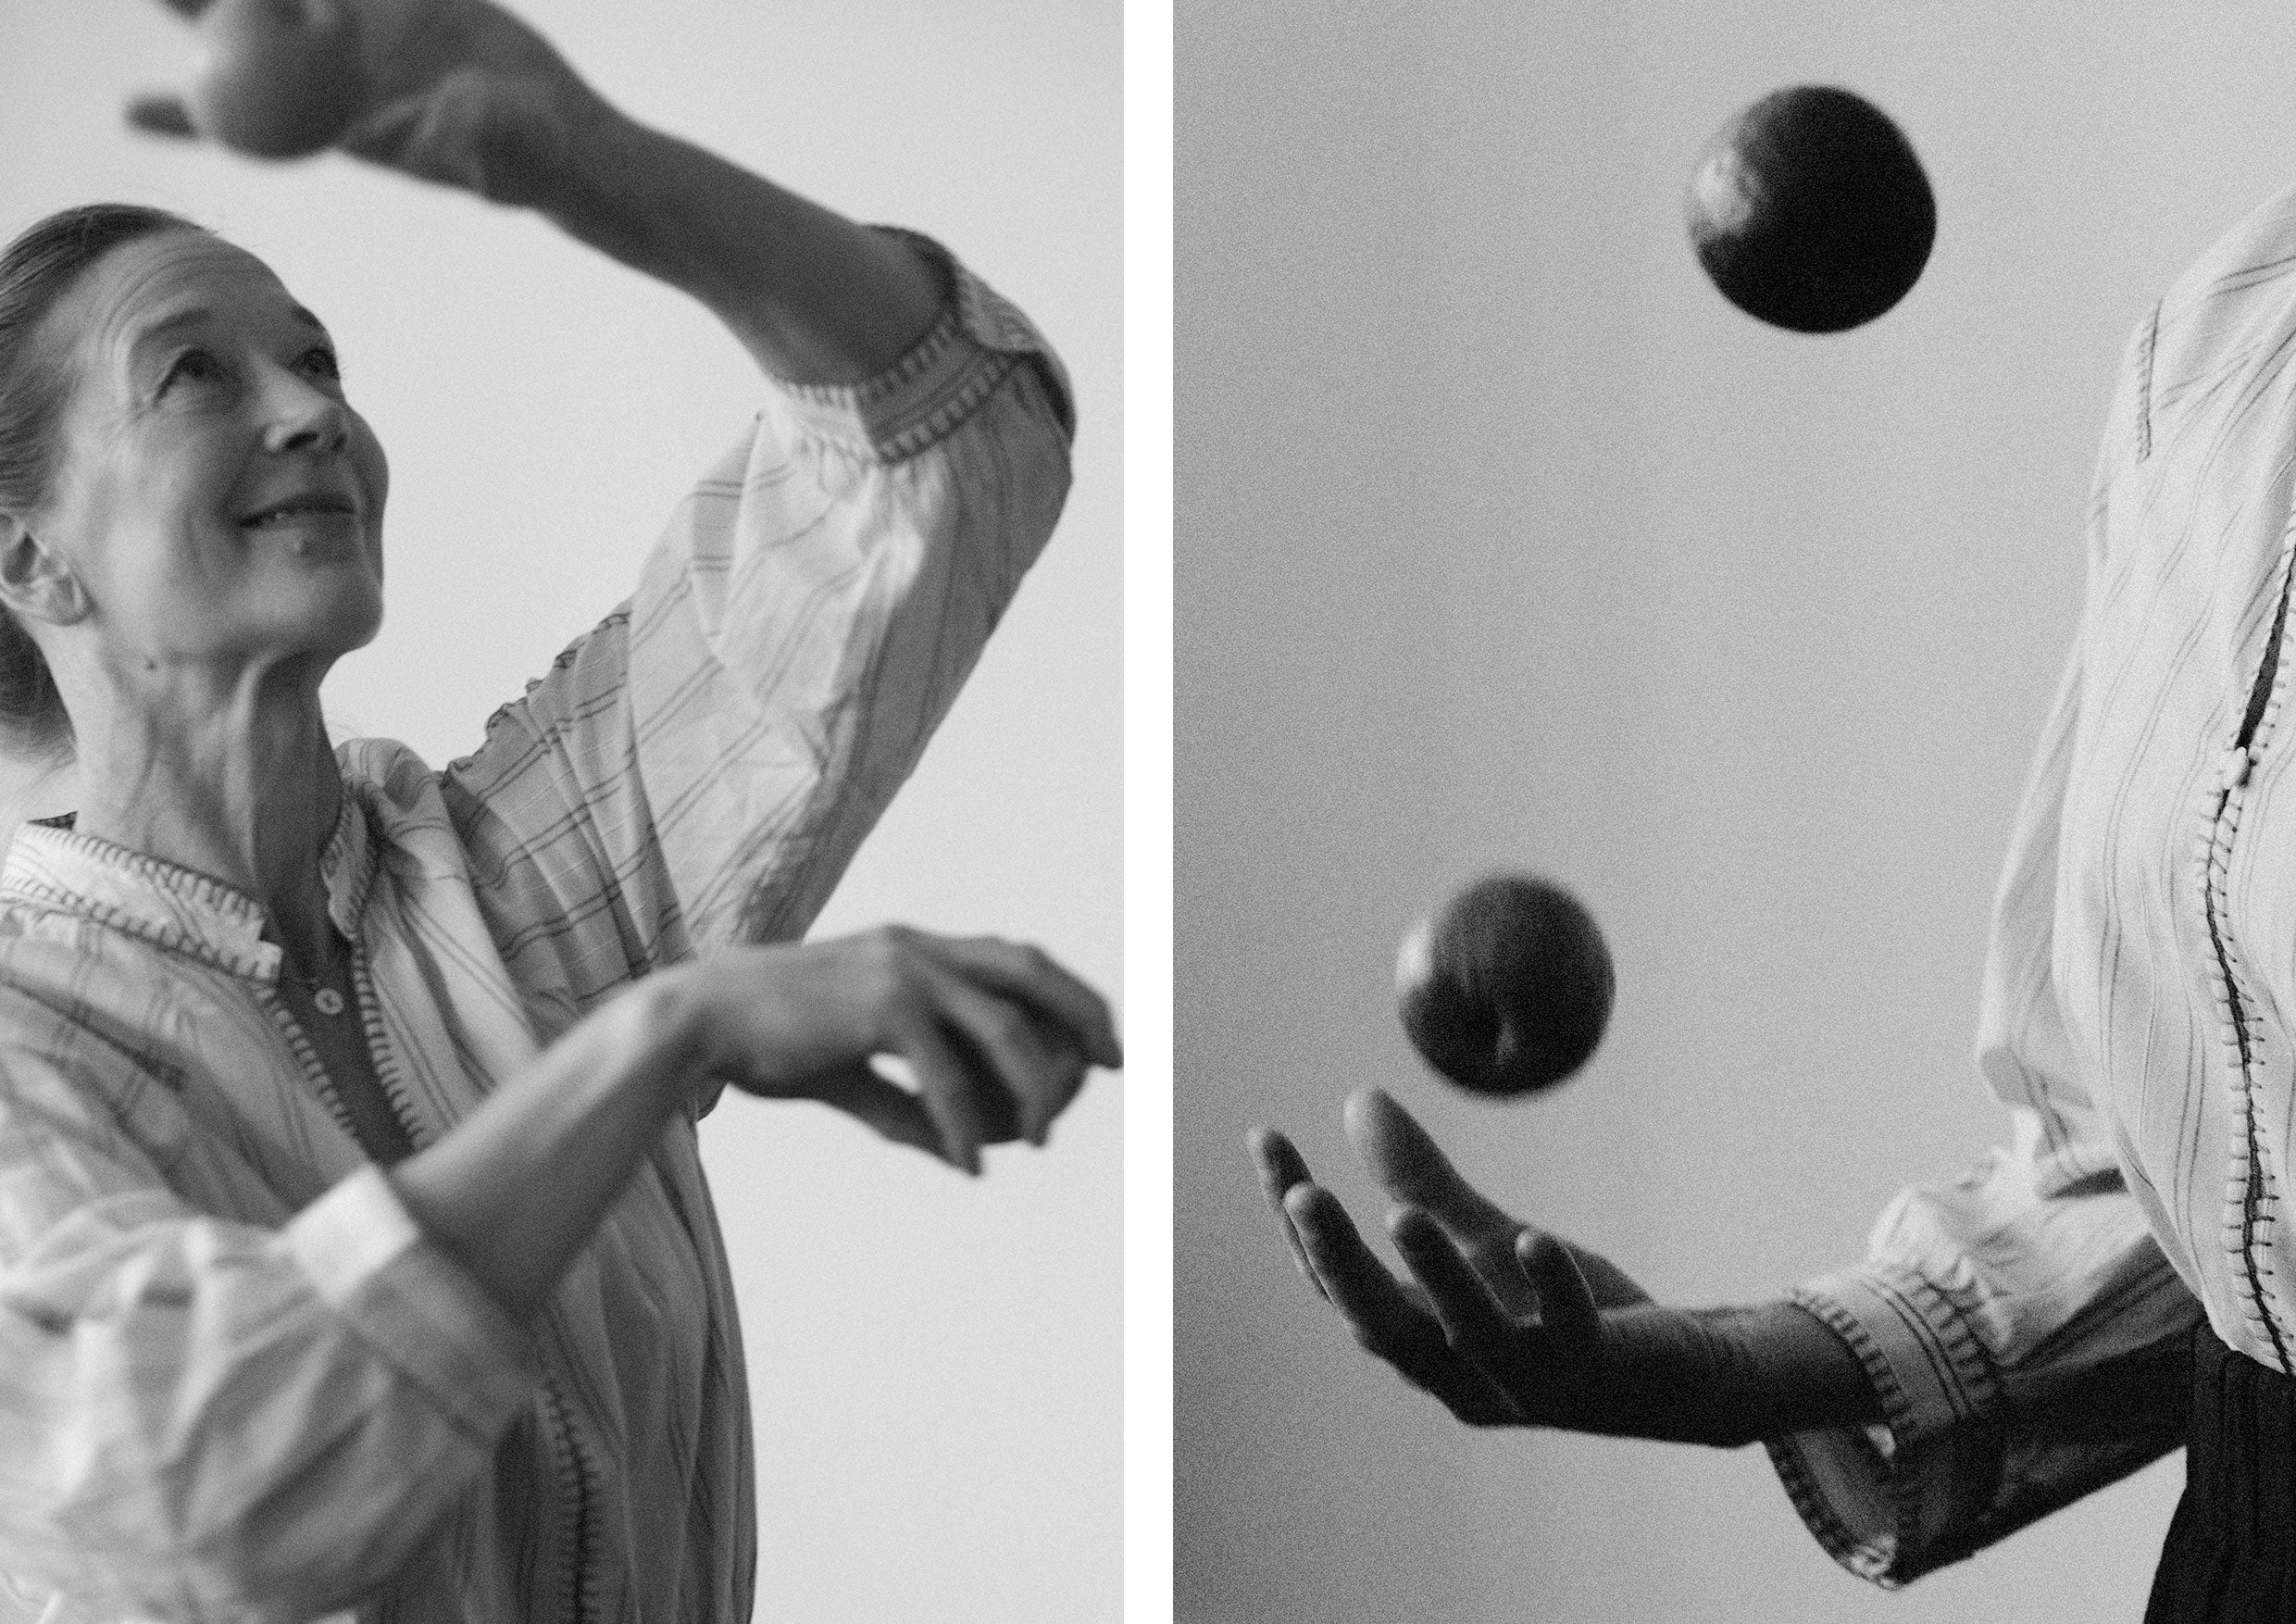 Woman juggling in black and white